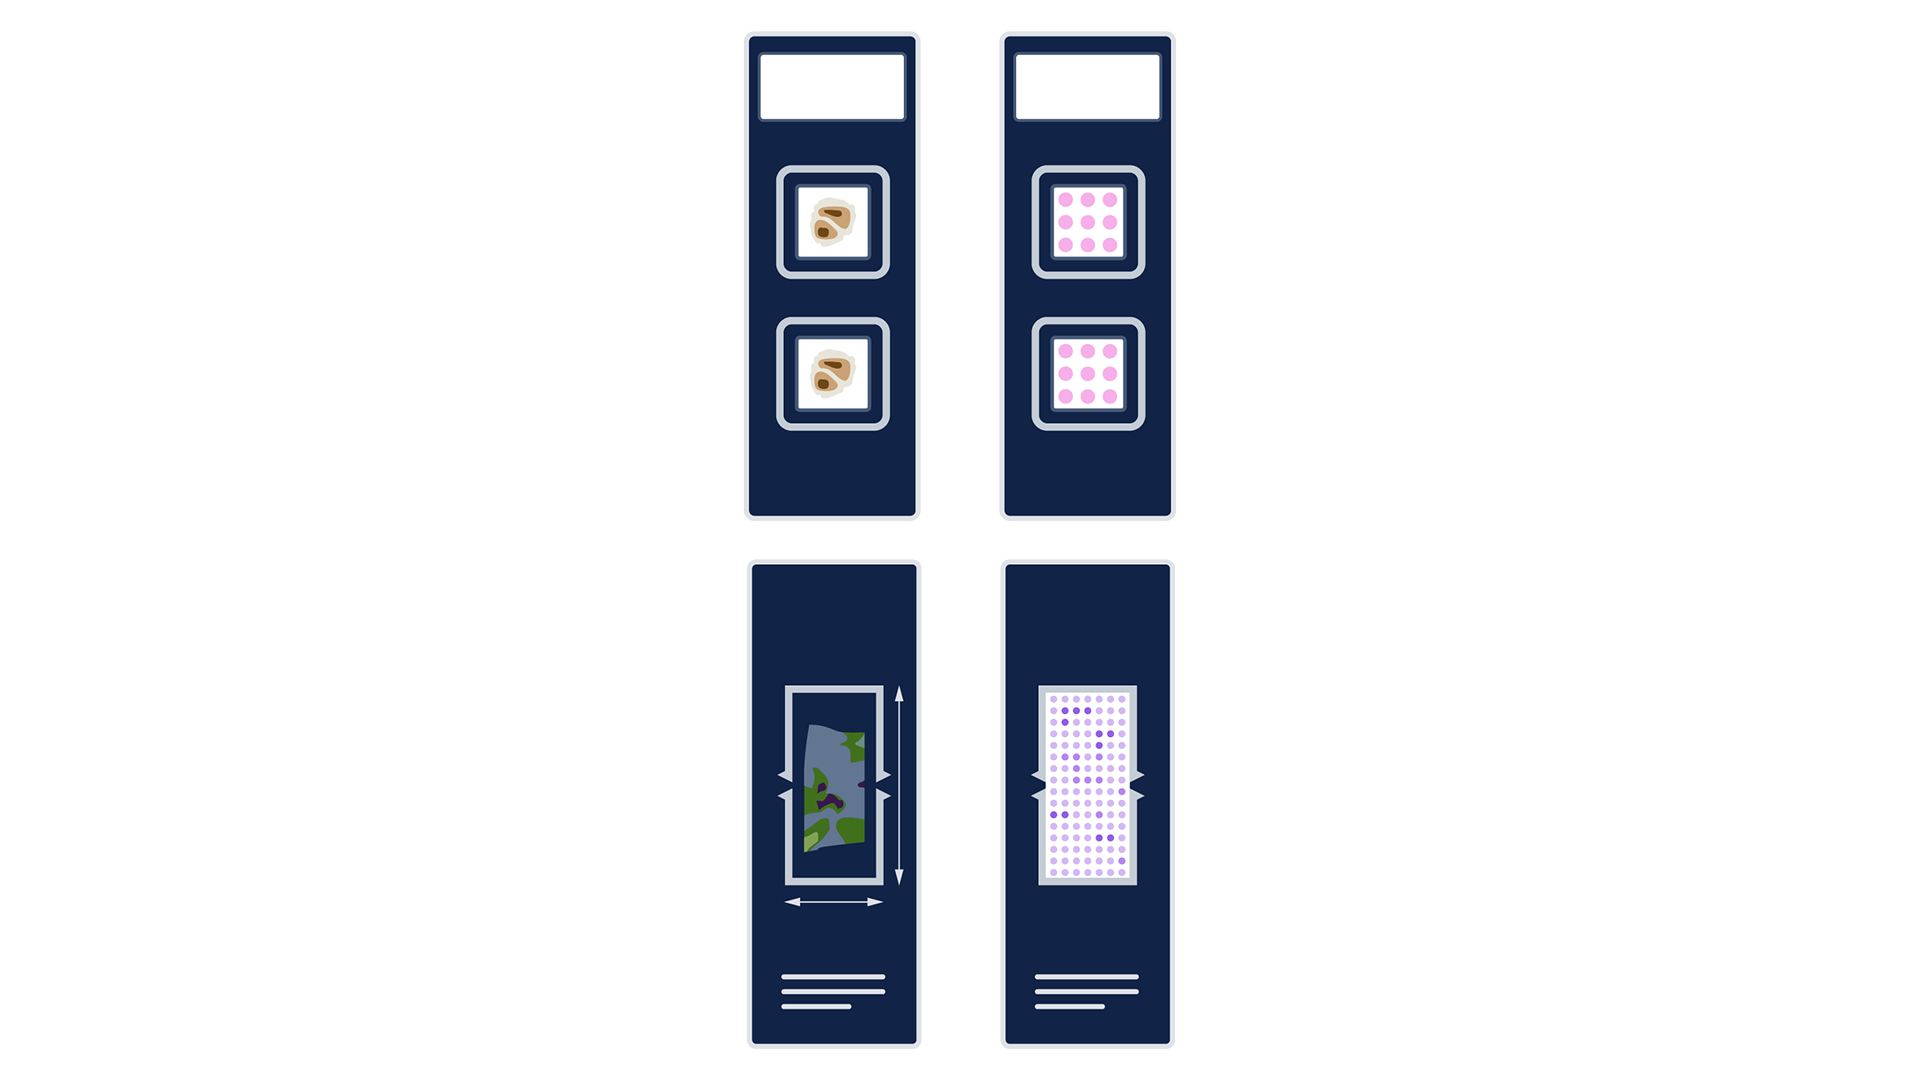 Figure 3. Example of tissue placement configurations on Visium HD and Xenium slides. Depending on the needs of your experiment, a single run of Visium HD (top) or Xenium (bottom) can be optimized with a variety of different tissue configurations, including (but not limited to) single large sections and tissue microarrays.